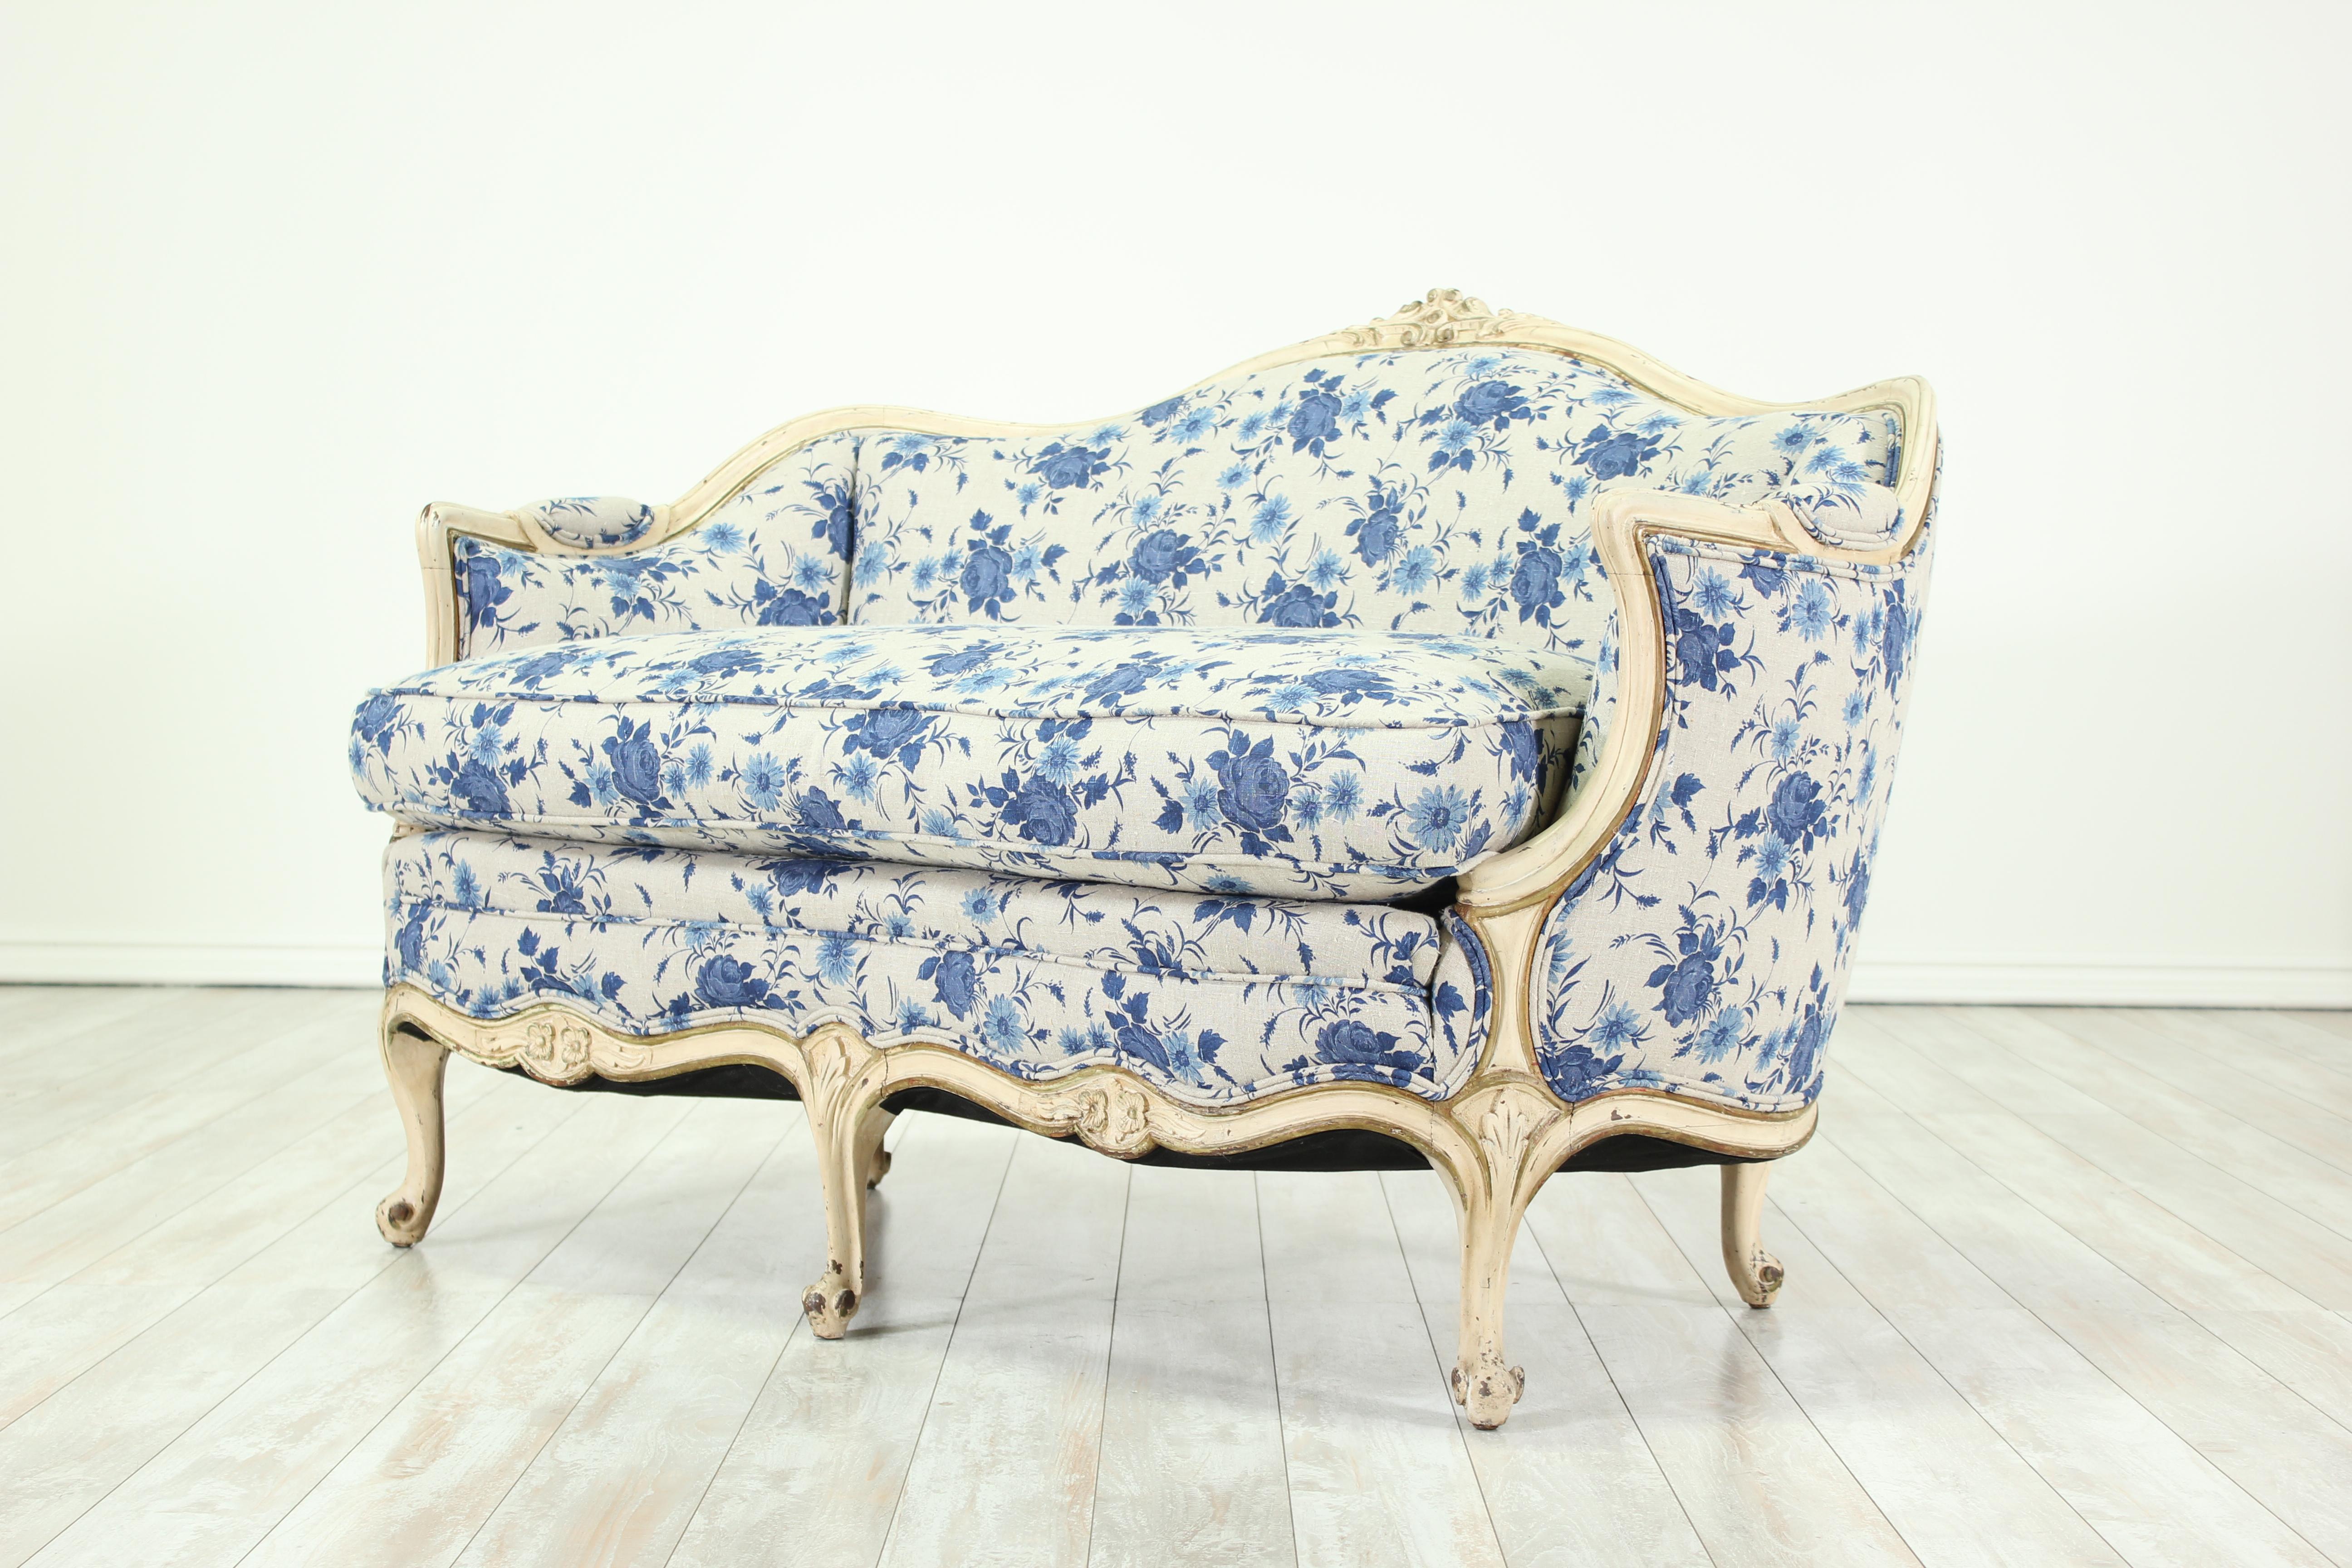 Pretty, 1940s Louis XV-style painted and carved settee with a new blue and white floral-printed linen upholstery. Loose seat cushion.